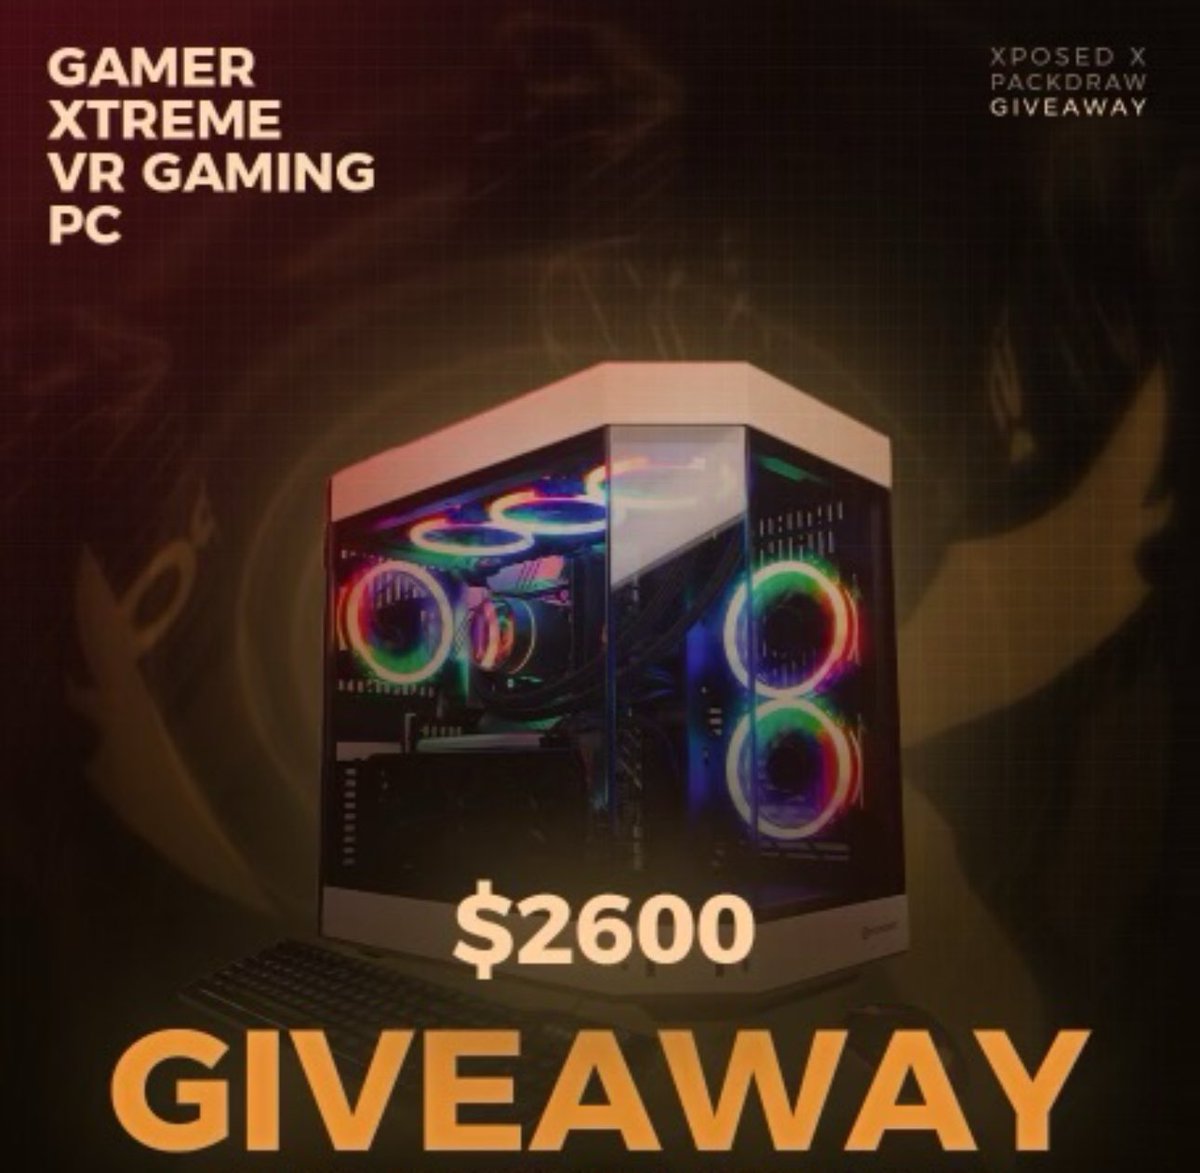 ⭐️PC GIVEAWAY⭐️

🚨(2) Gamer XTREME VR Gaming PC Giveaway! ($2600) 🖥️ 🚨

To Enter: ⭐️
- Follow me + @PackDraw ✅
- Repost ✅
- Tag one friend ✅

Rolls in 1 week ⏰ *can be redeemed for crypto*